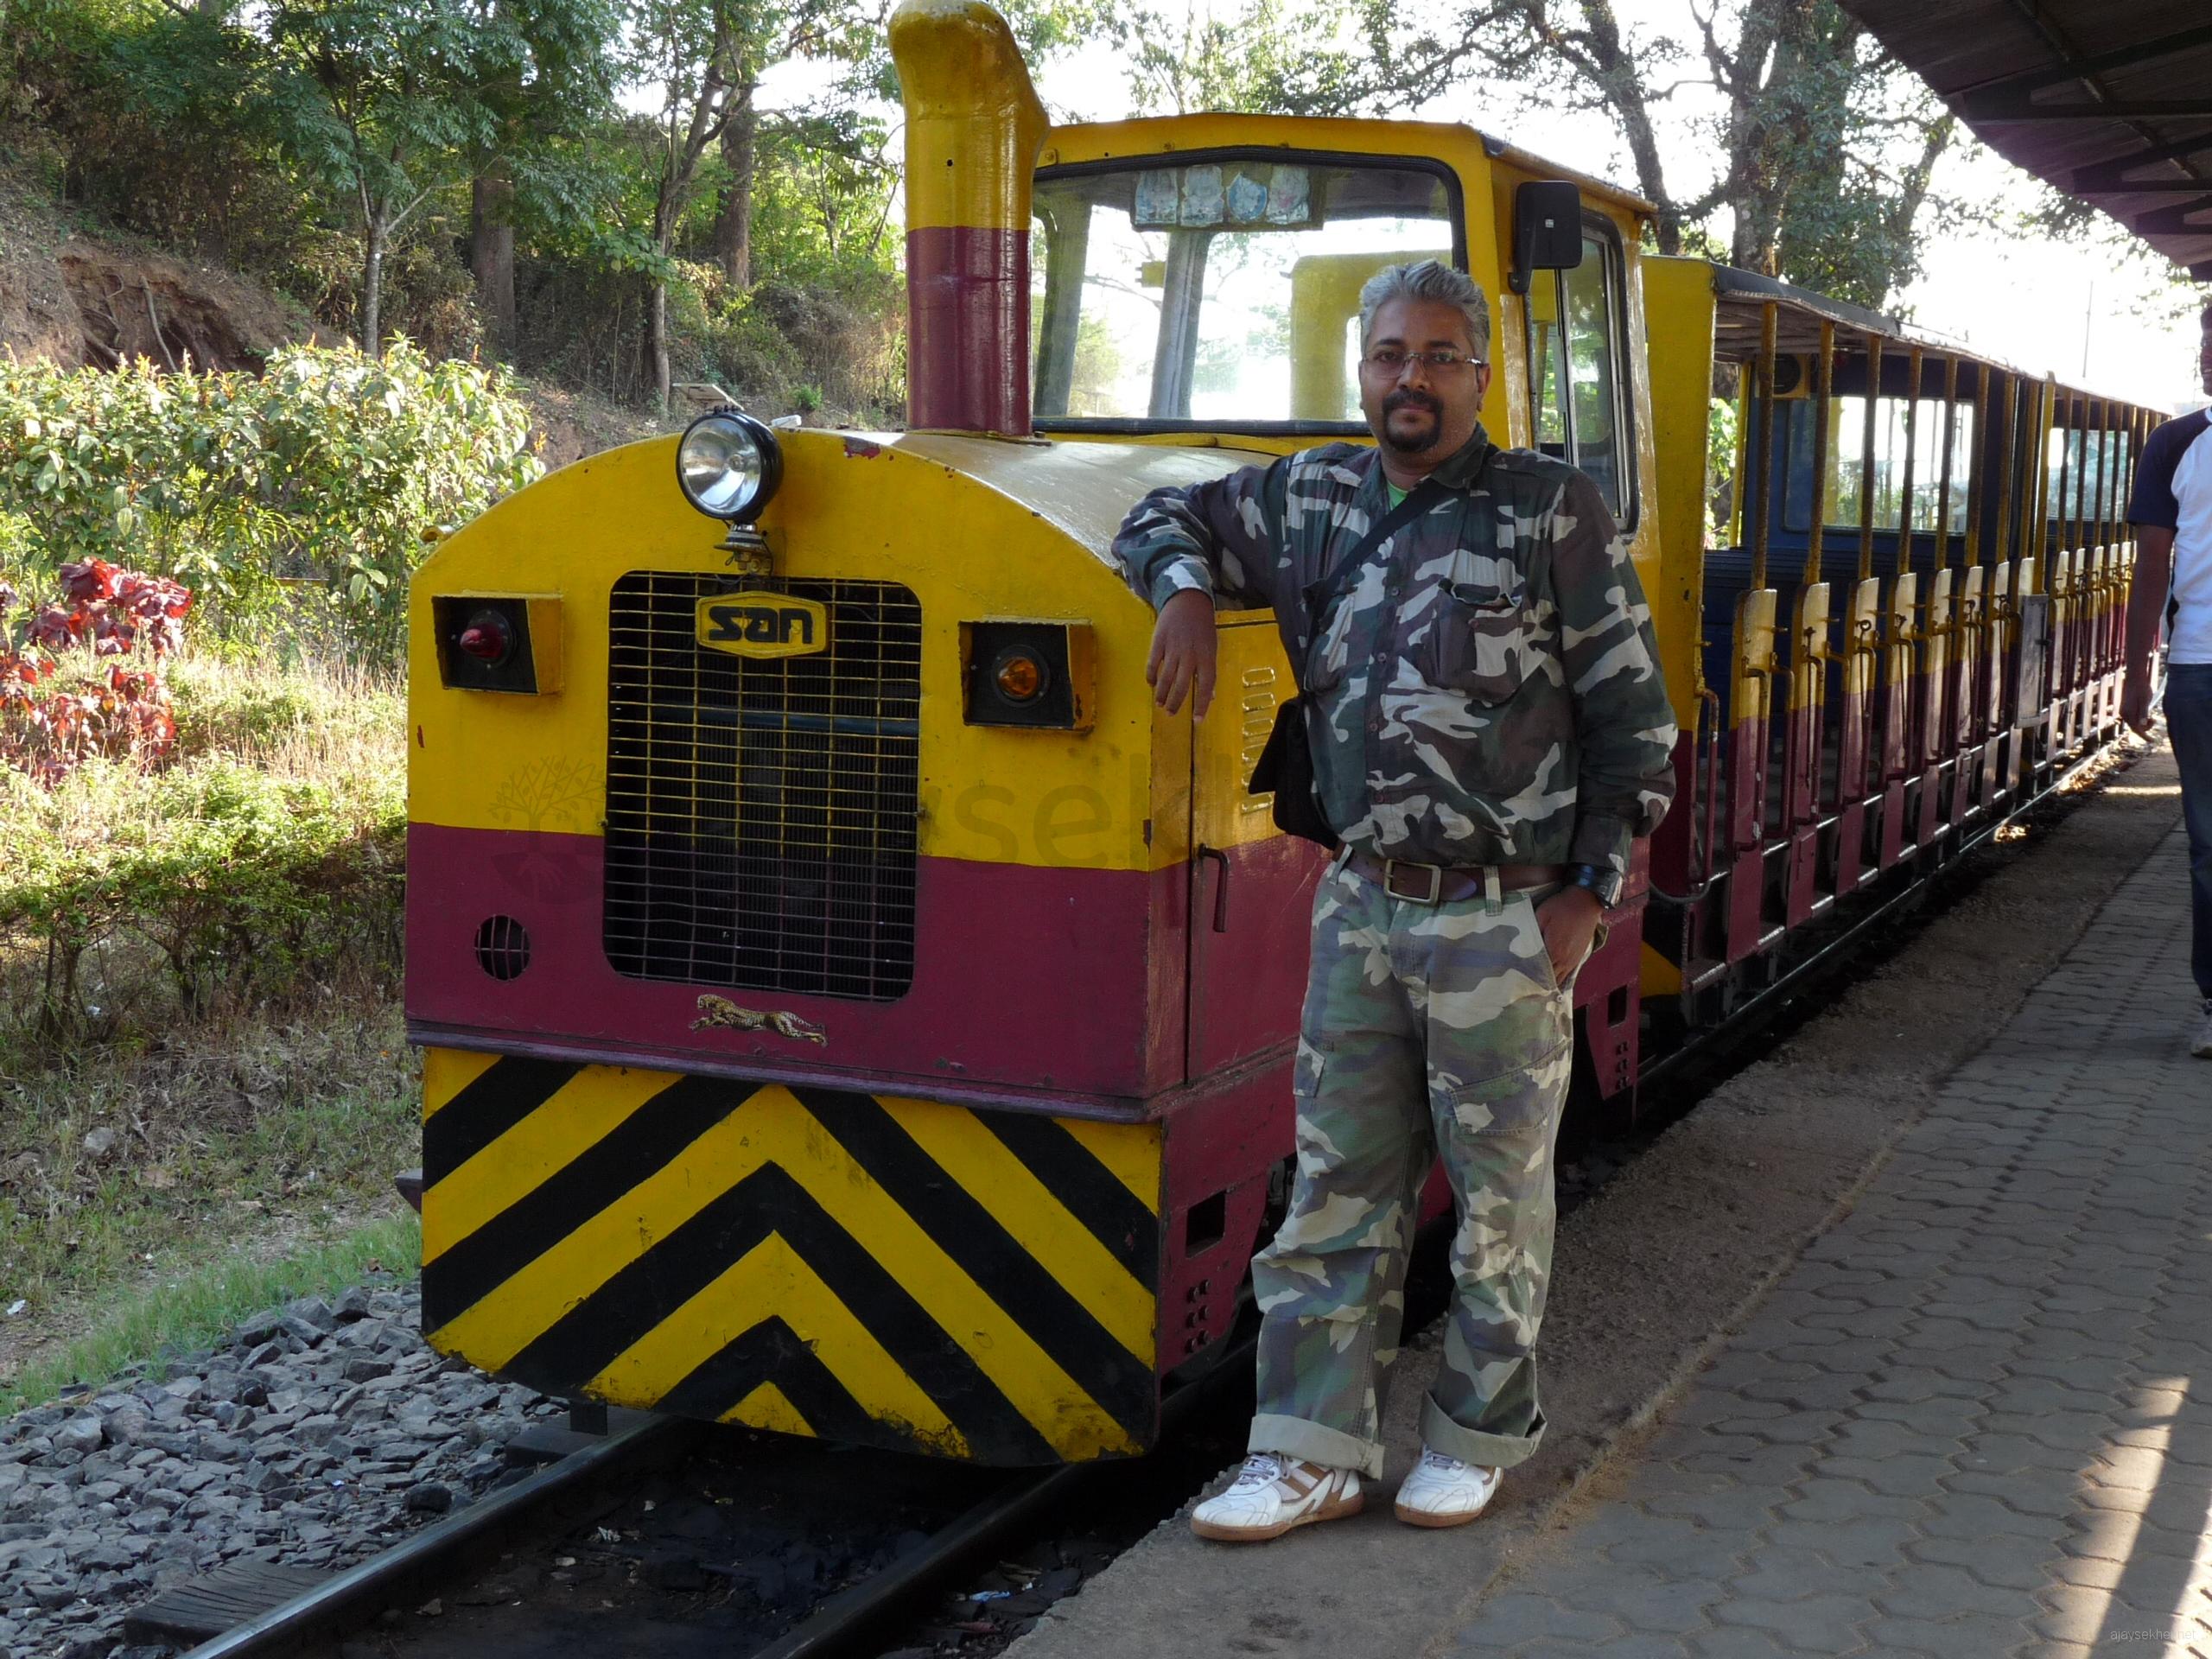 Amusing and moving: The old engine of the toy train in Coorg